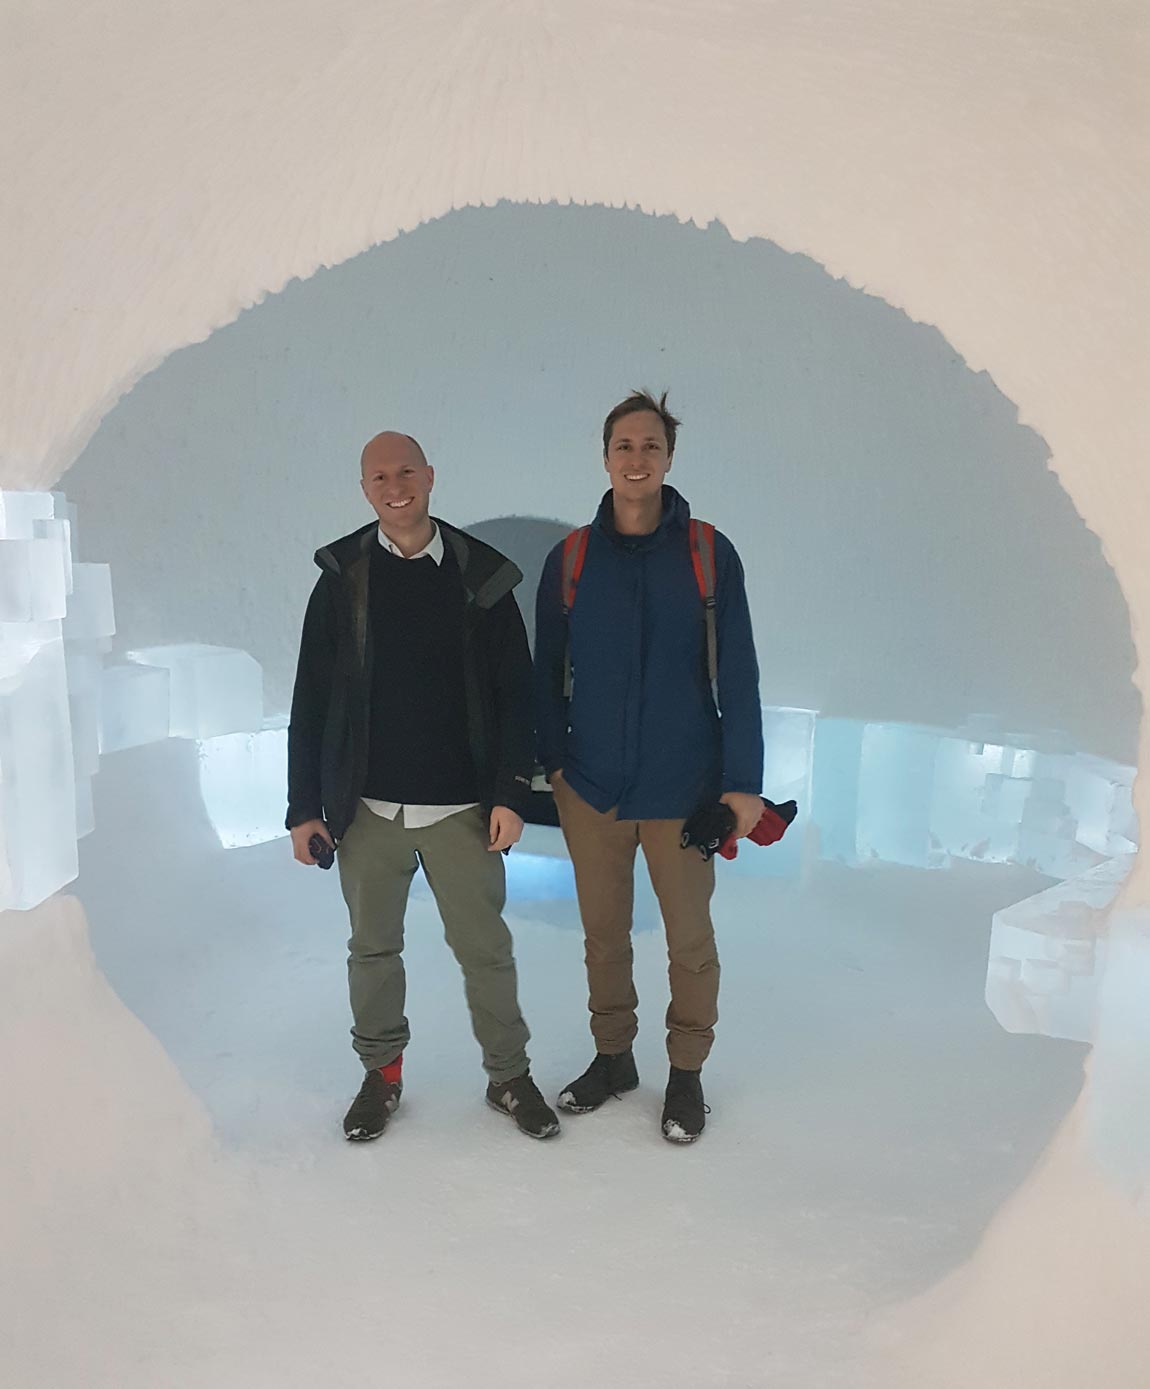 Brothers Hugh and Howard Miller from the UK, working as furniture and landscape designers respectively. Their design, A Rich Seam, won the hearts of the ICEHOTEL judging panel. They spent 6 weeks at the end of 2017 making their design a reality in Swedish Lapland.